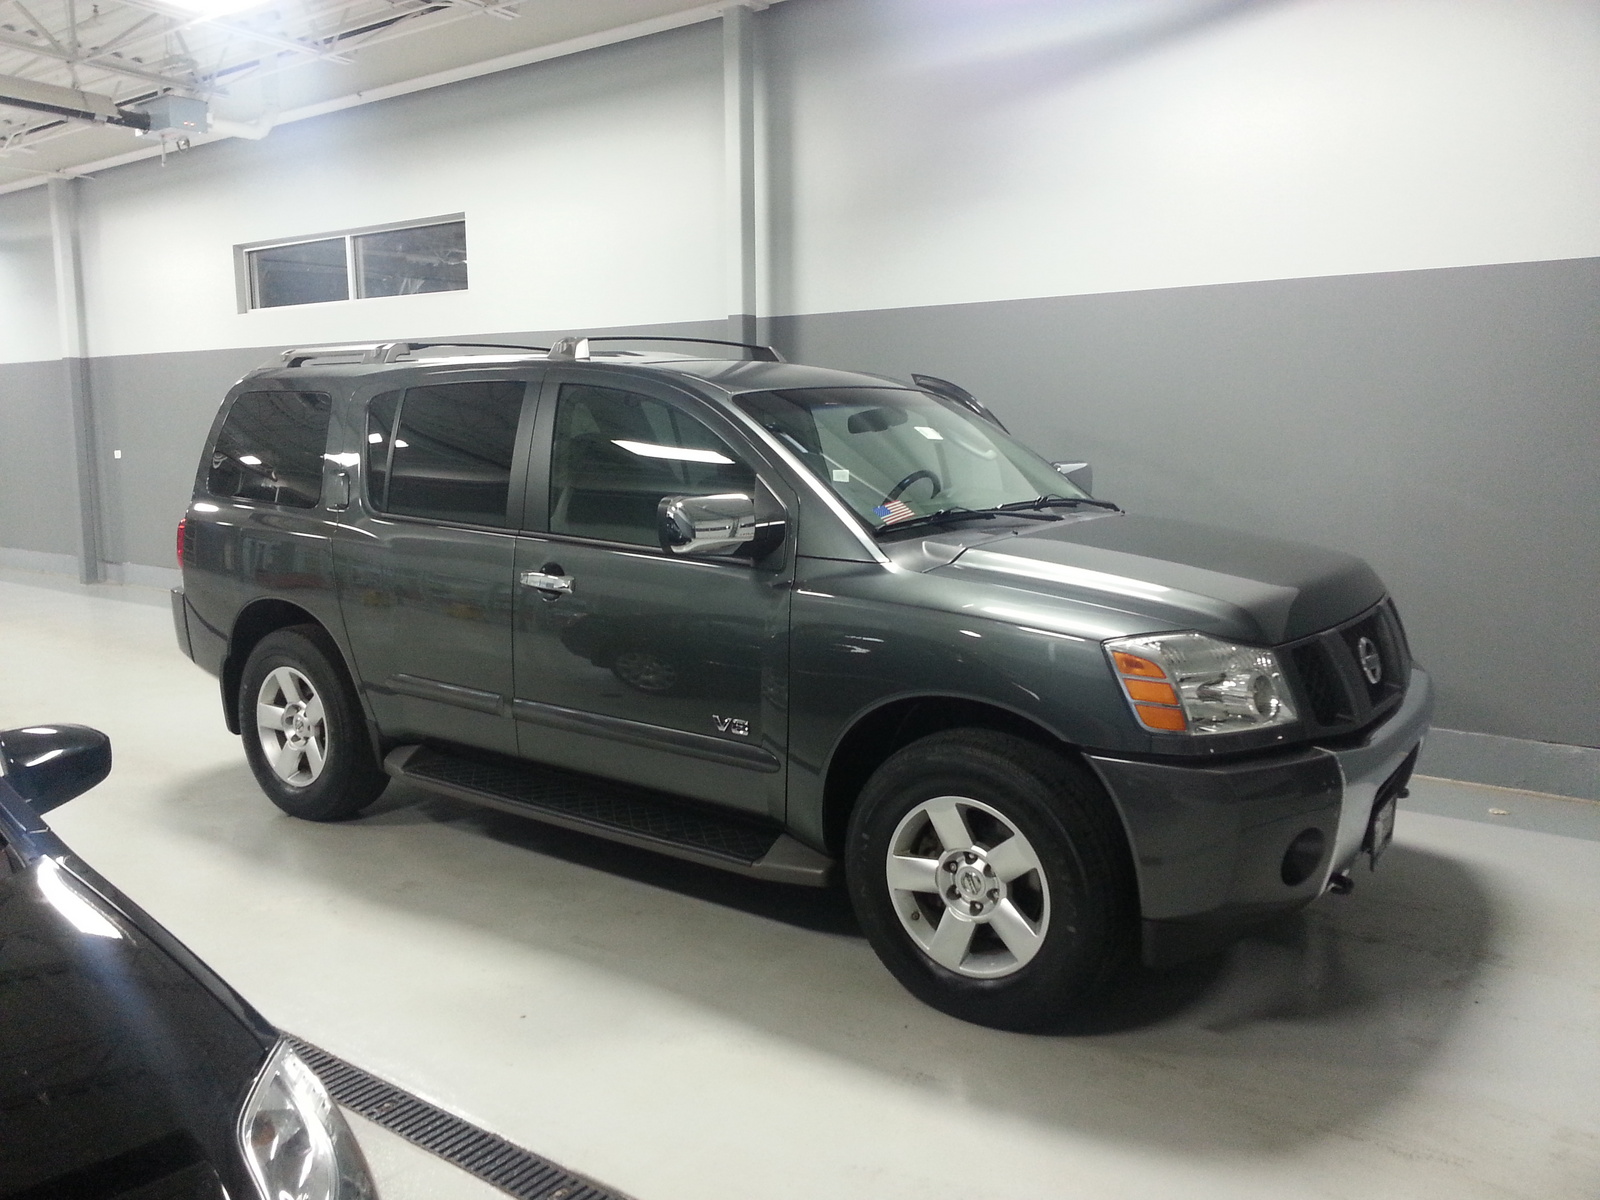 Finding a used 2007 nissan armada #9